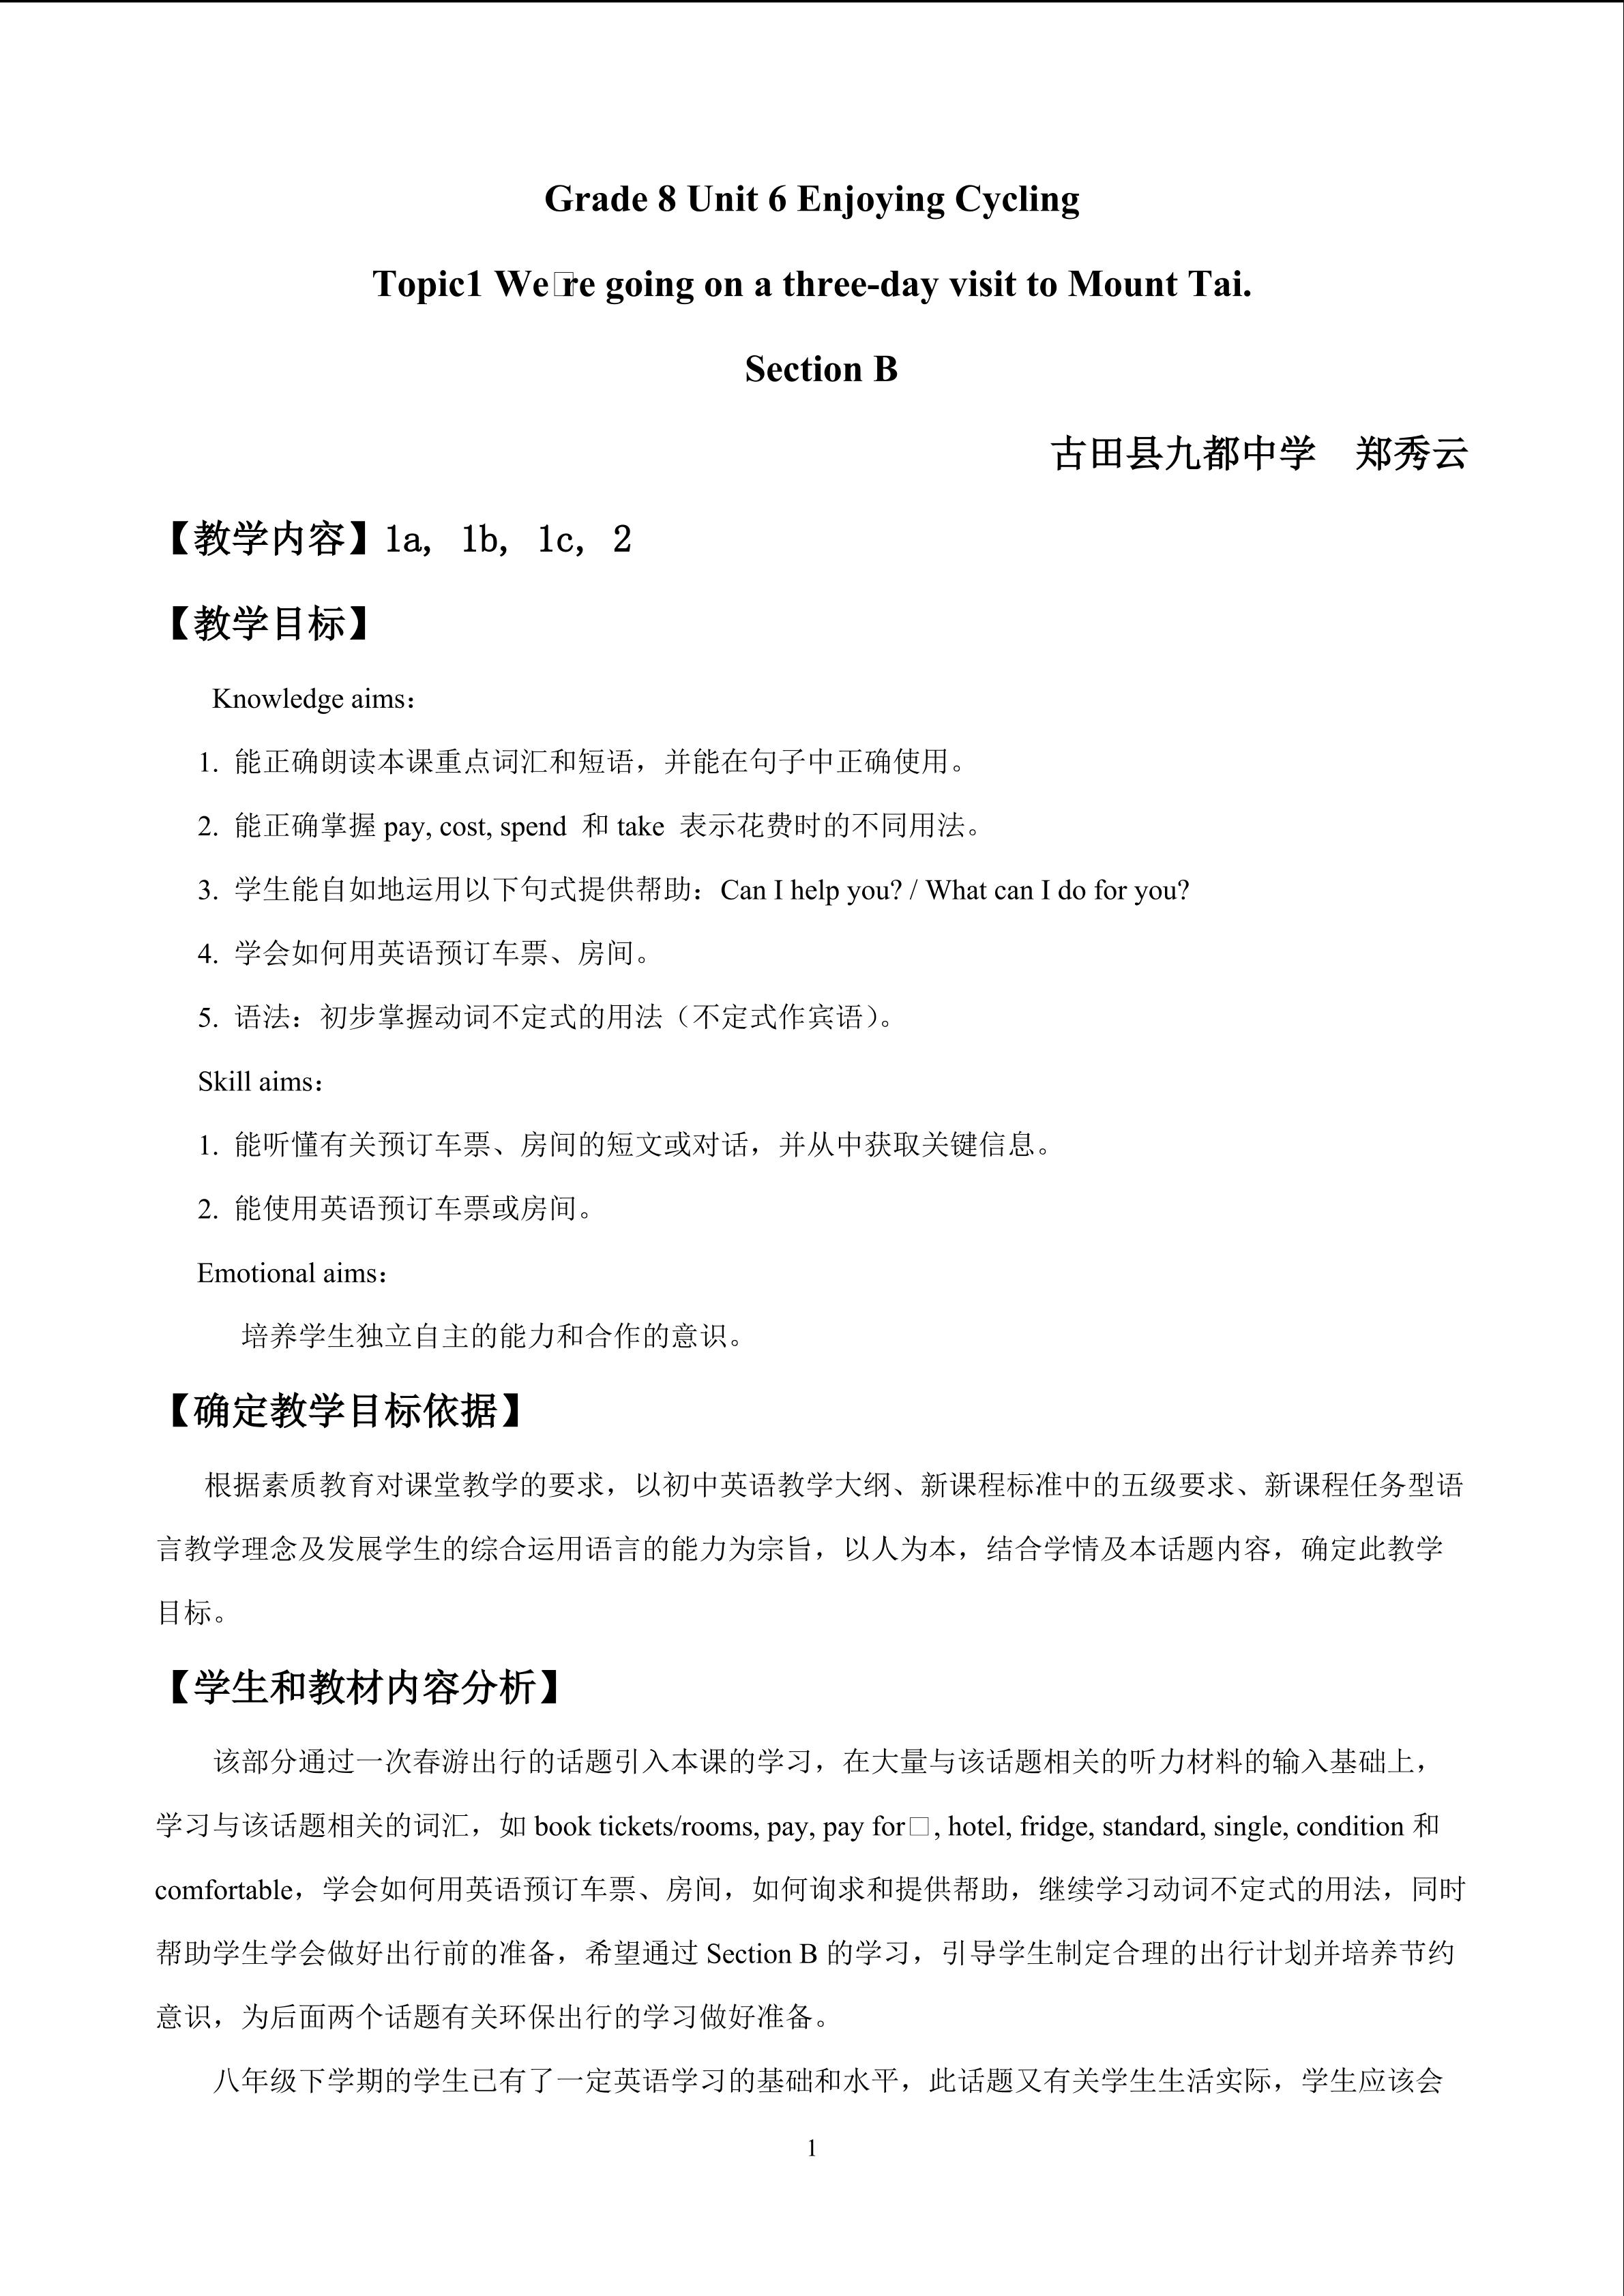 Unit 6 Topic1 Section B教学设计